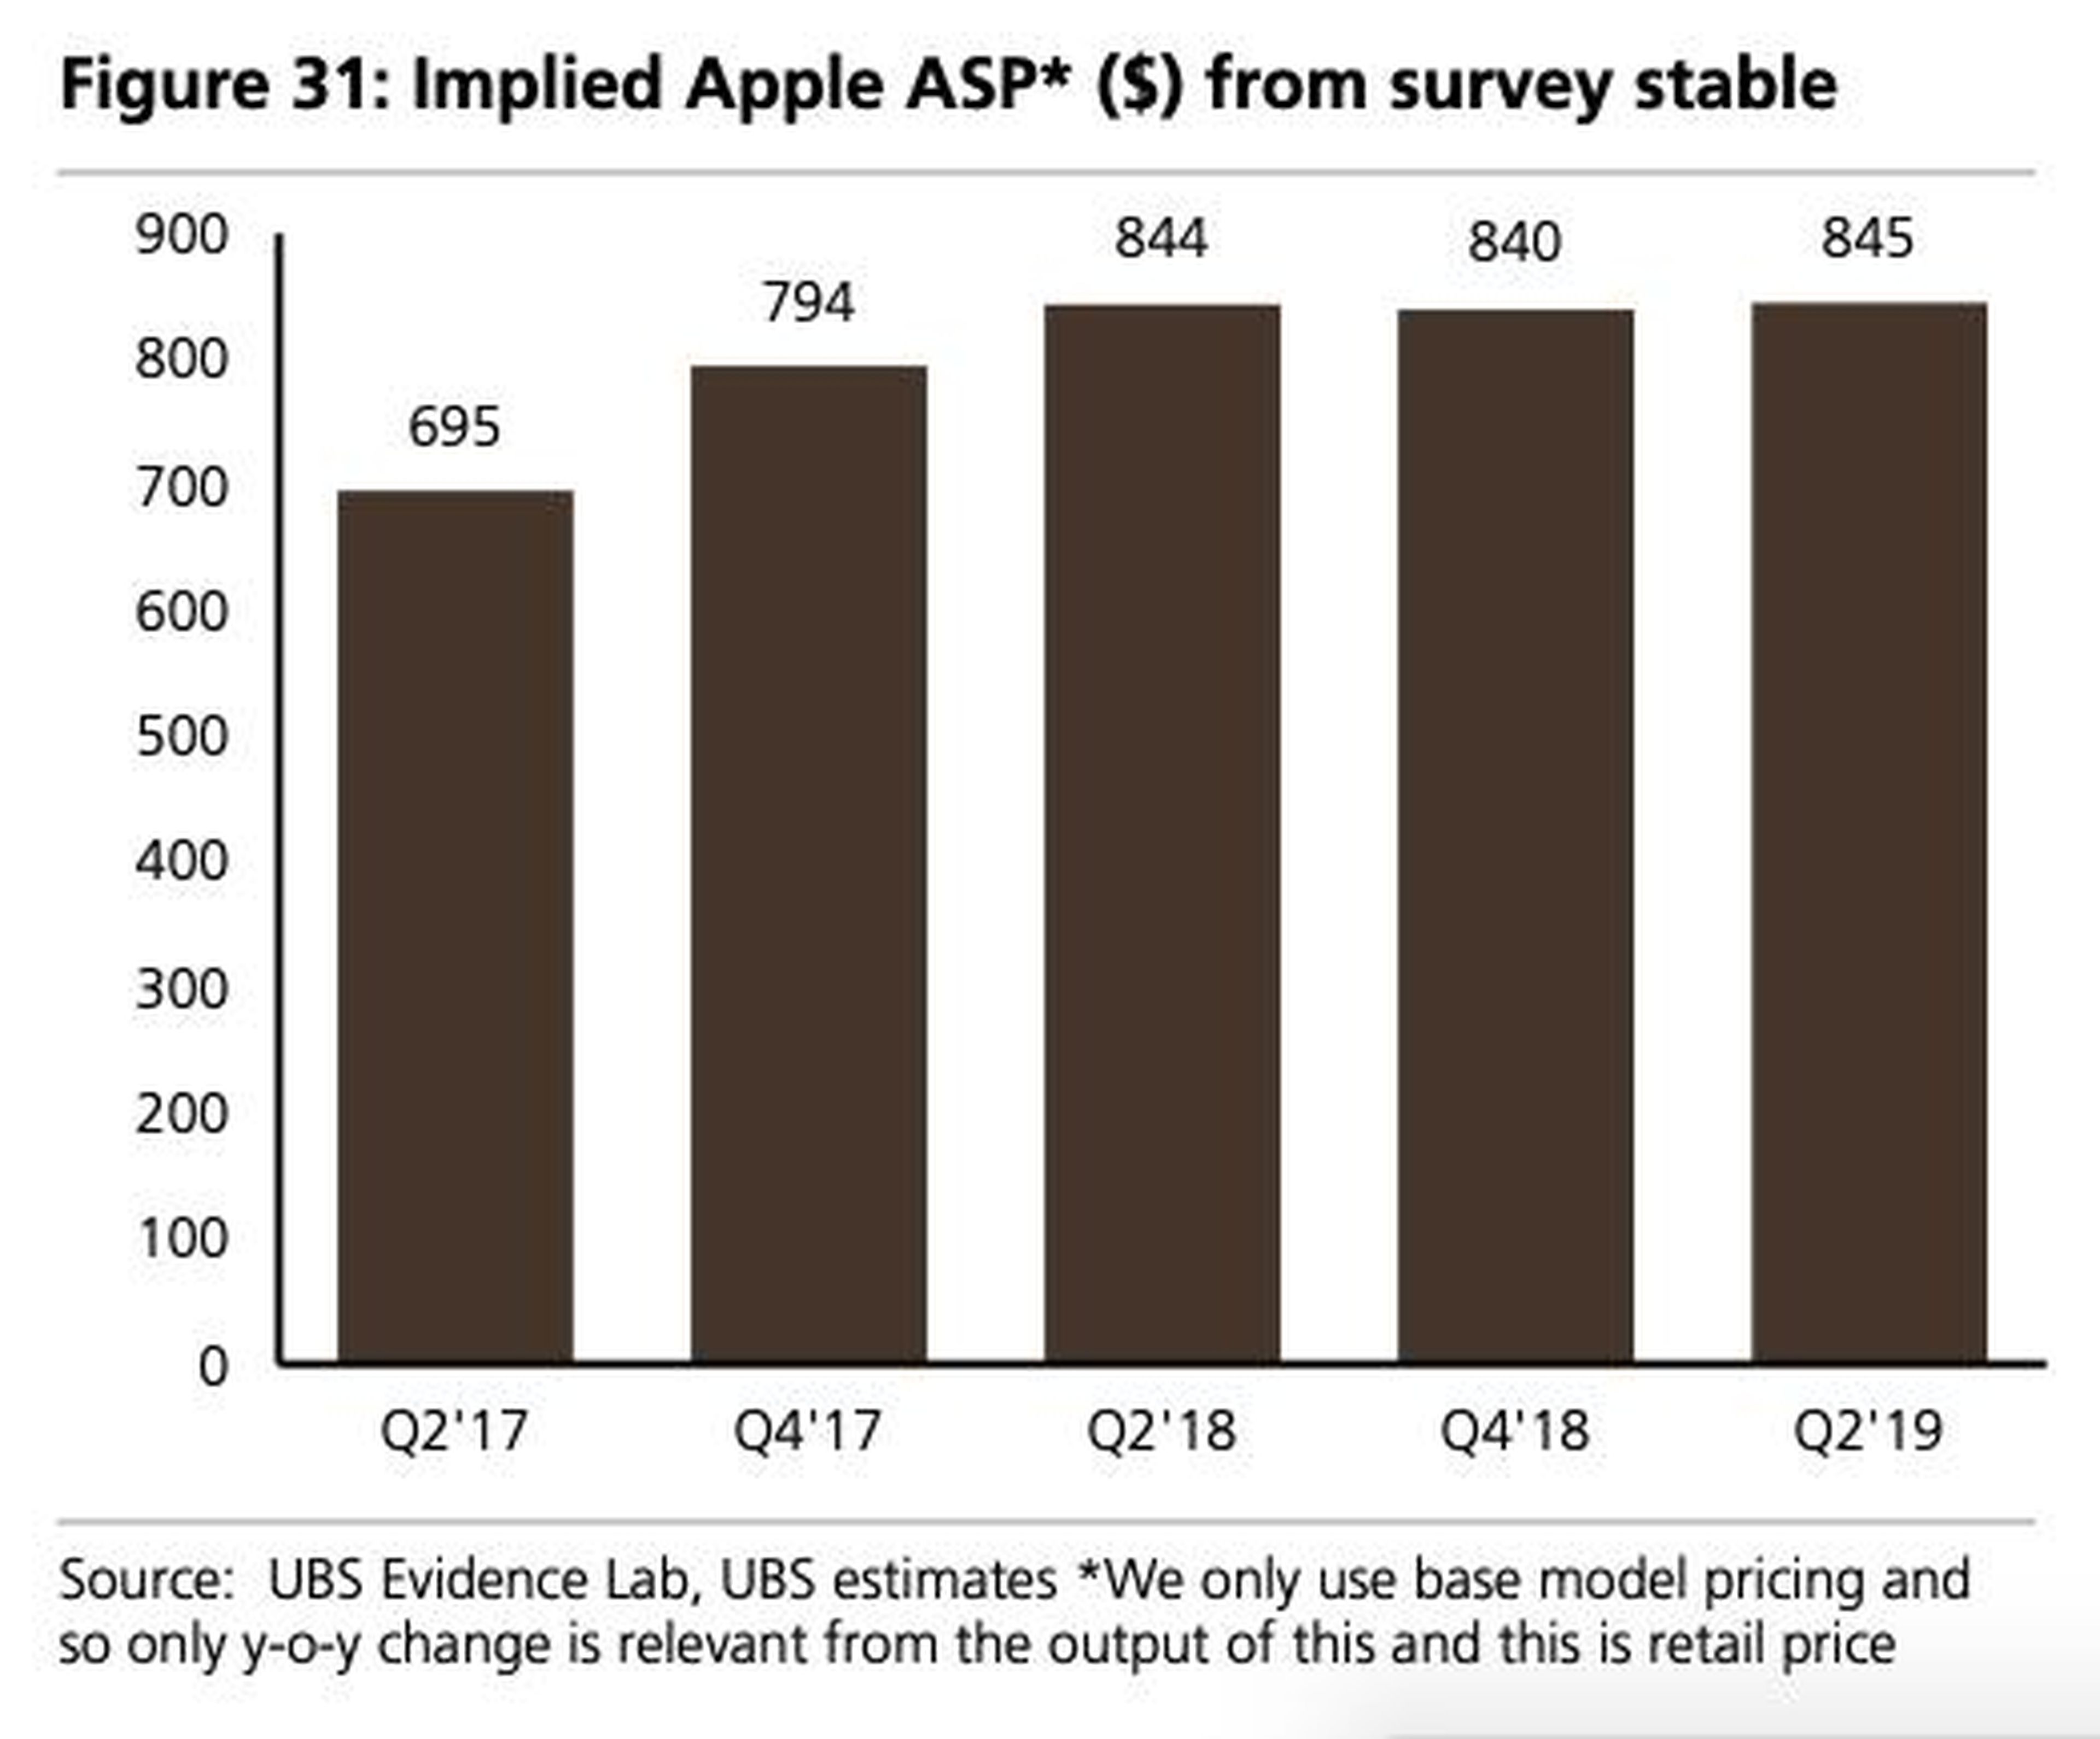 UBS says Apple's average selling price (ASP) has likely hit a ceiling, meaning there's not much room to raise prices.